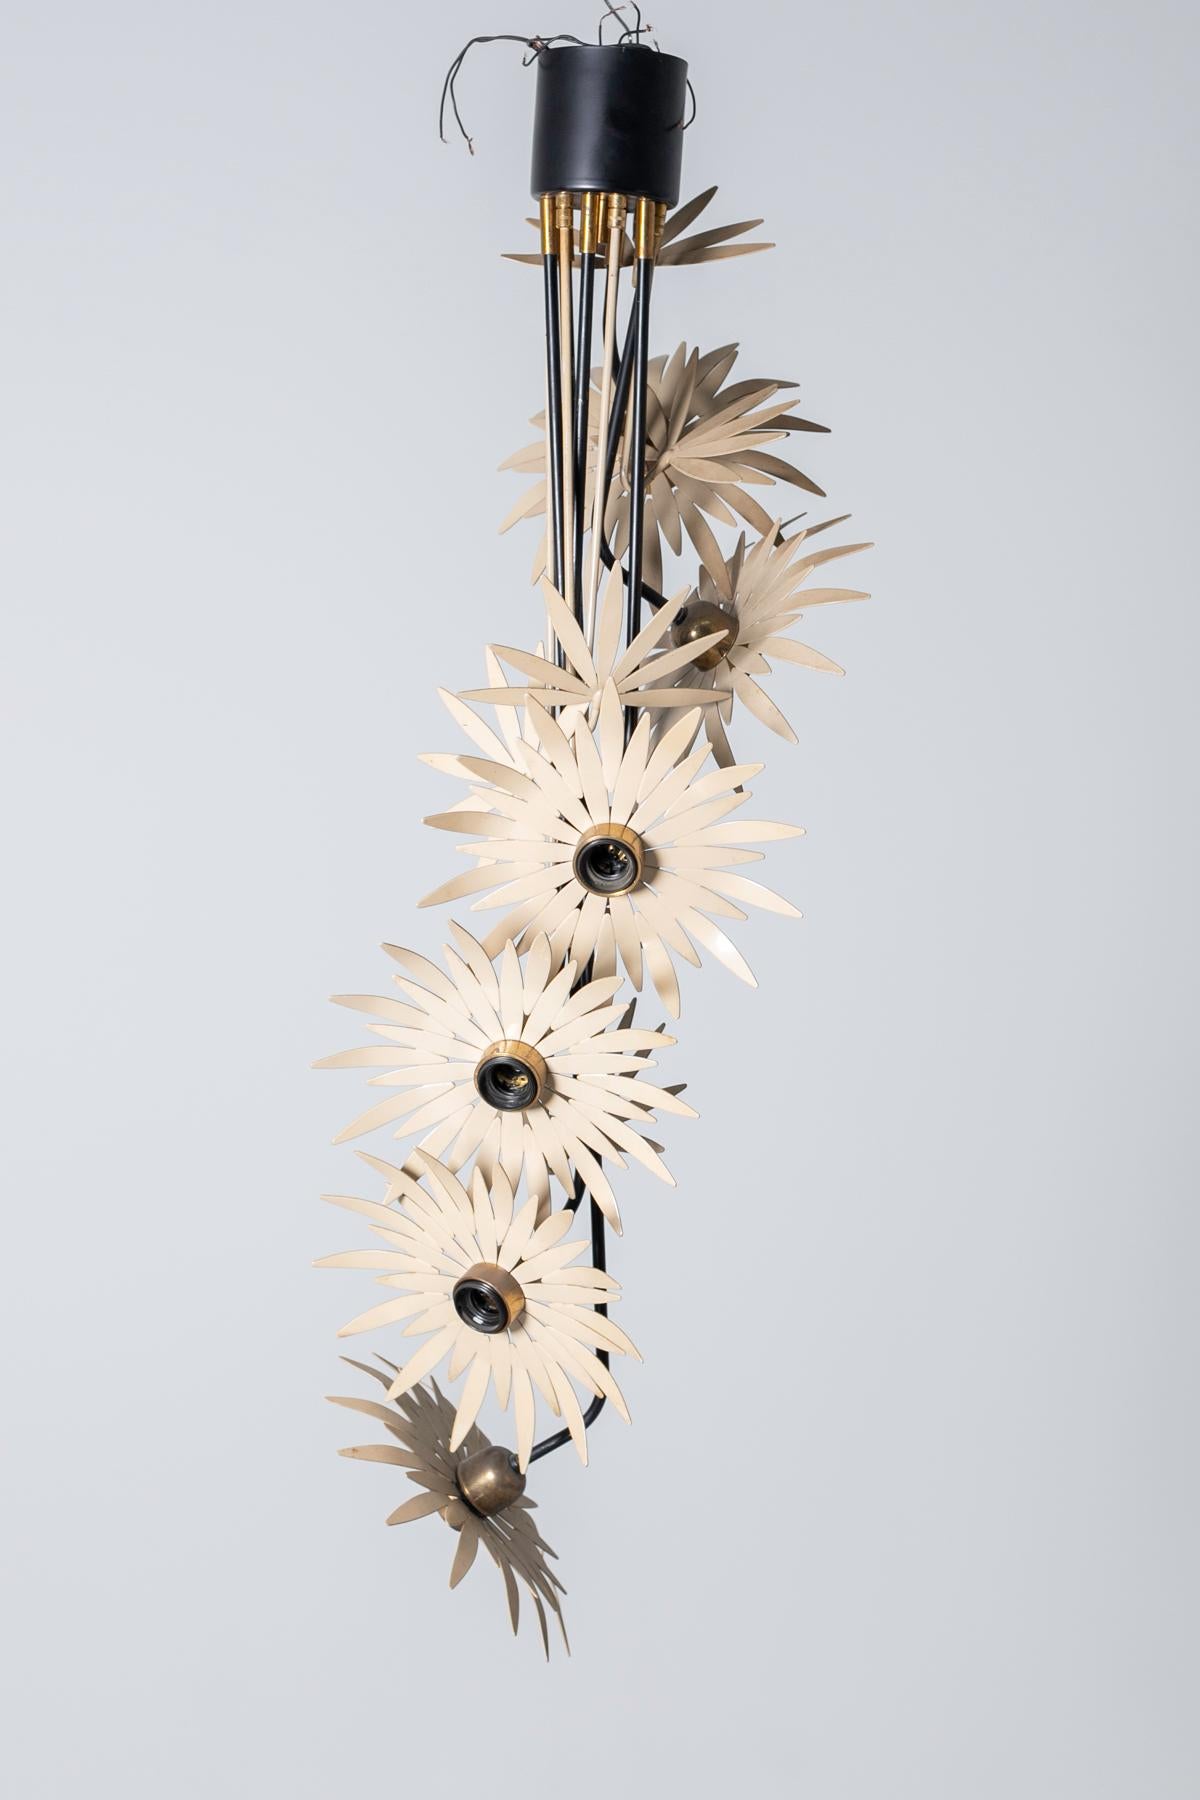 Italian pendant chandelier of the 1950s, attributed to Pietro Chiesa. The chandelier is made with 12 aluminium battens or tubes positioned in different heights. At the end of the aluminium tube we find cream-white flowers in painted aluminium, or